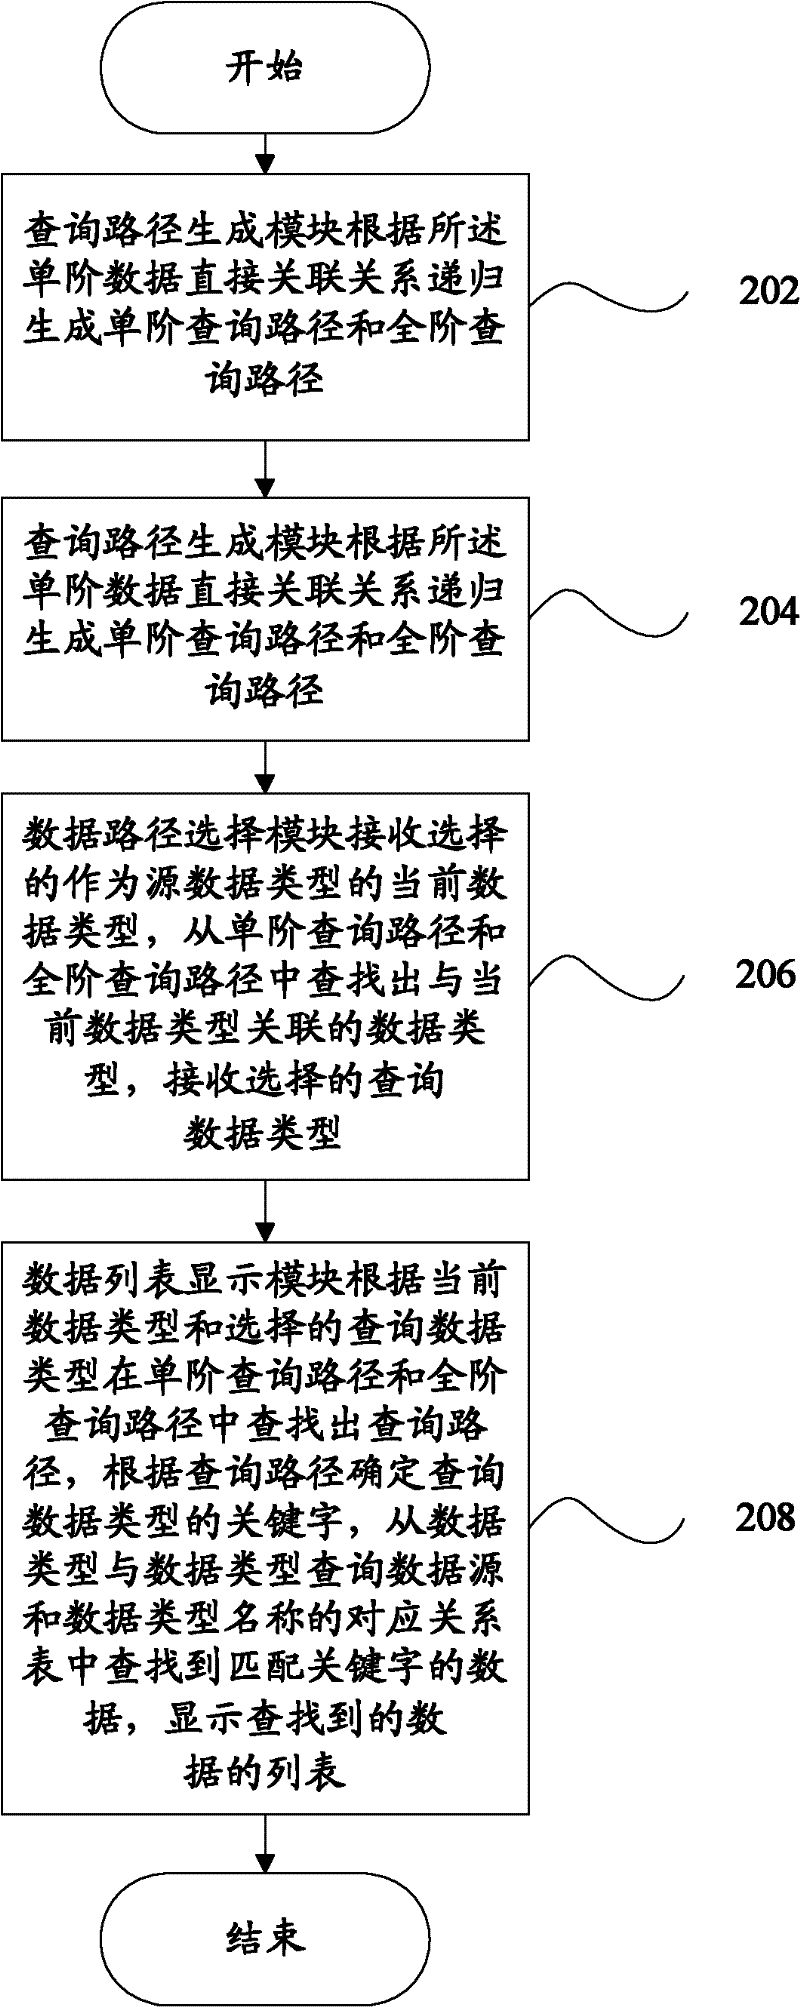 Data searching system and data searching method